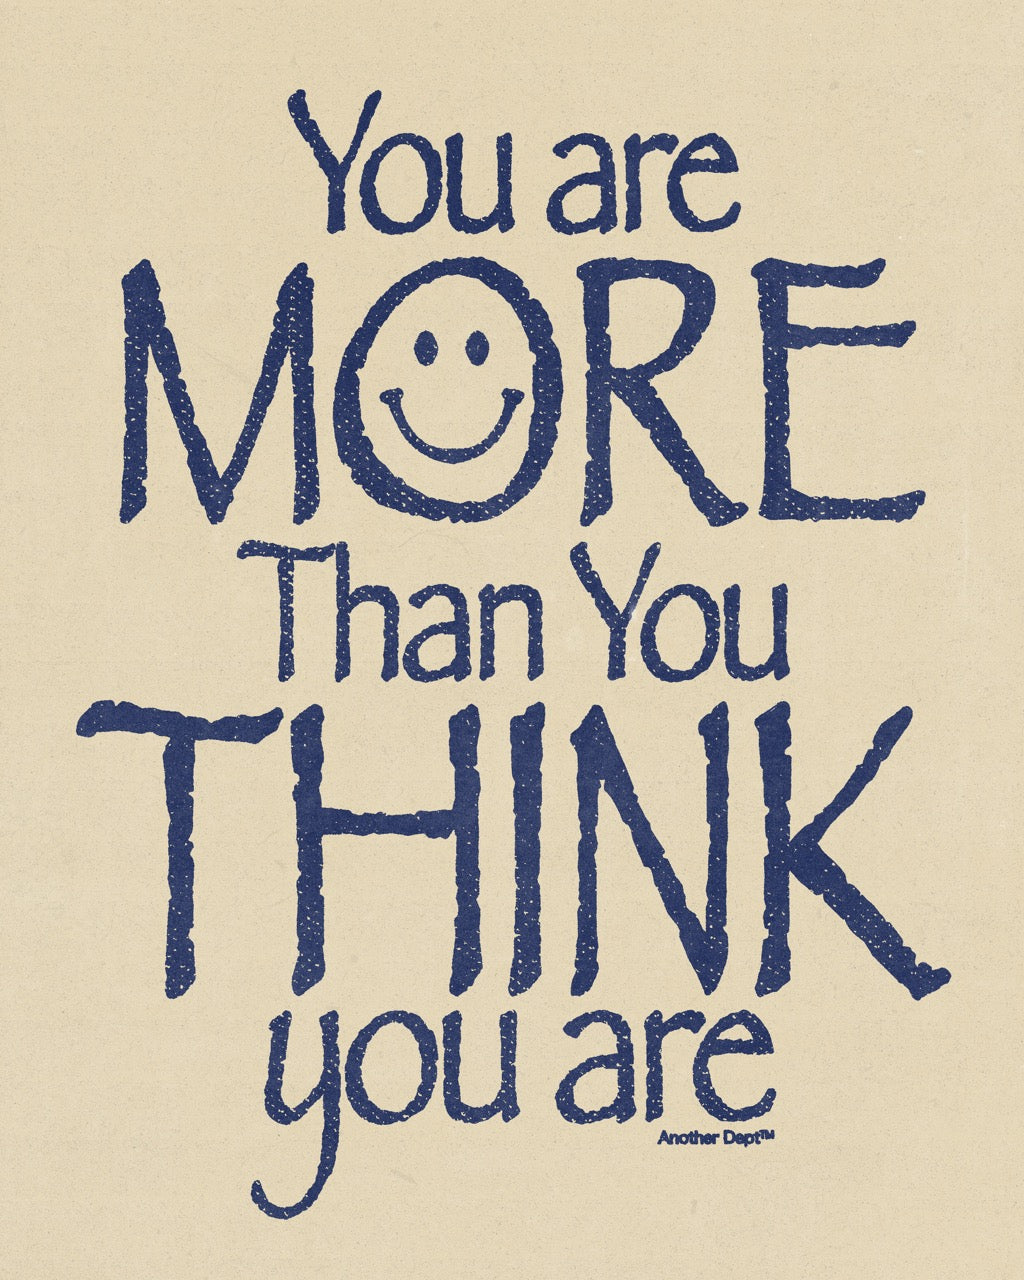 291 - More Than You Think